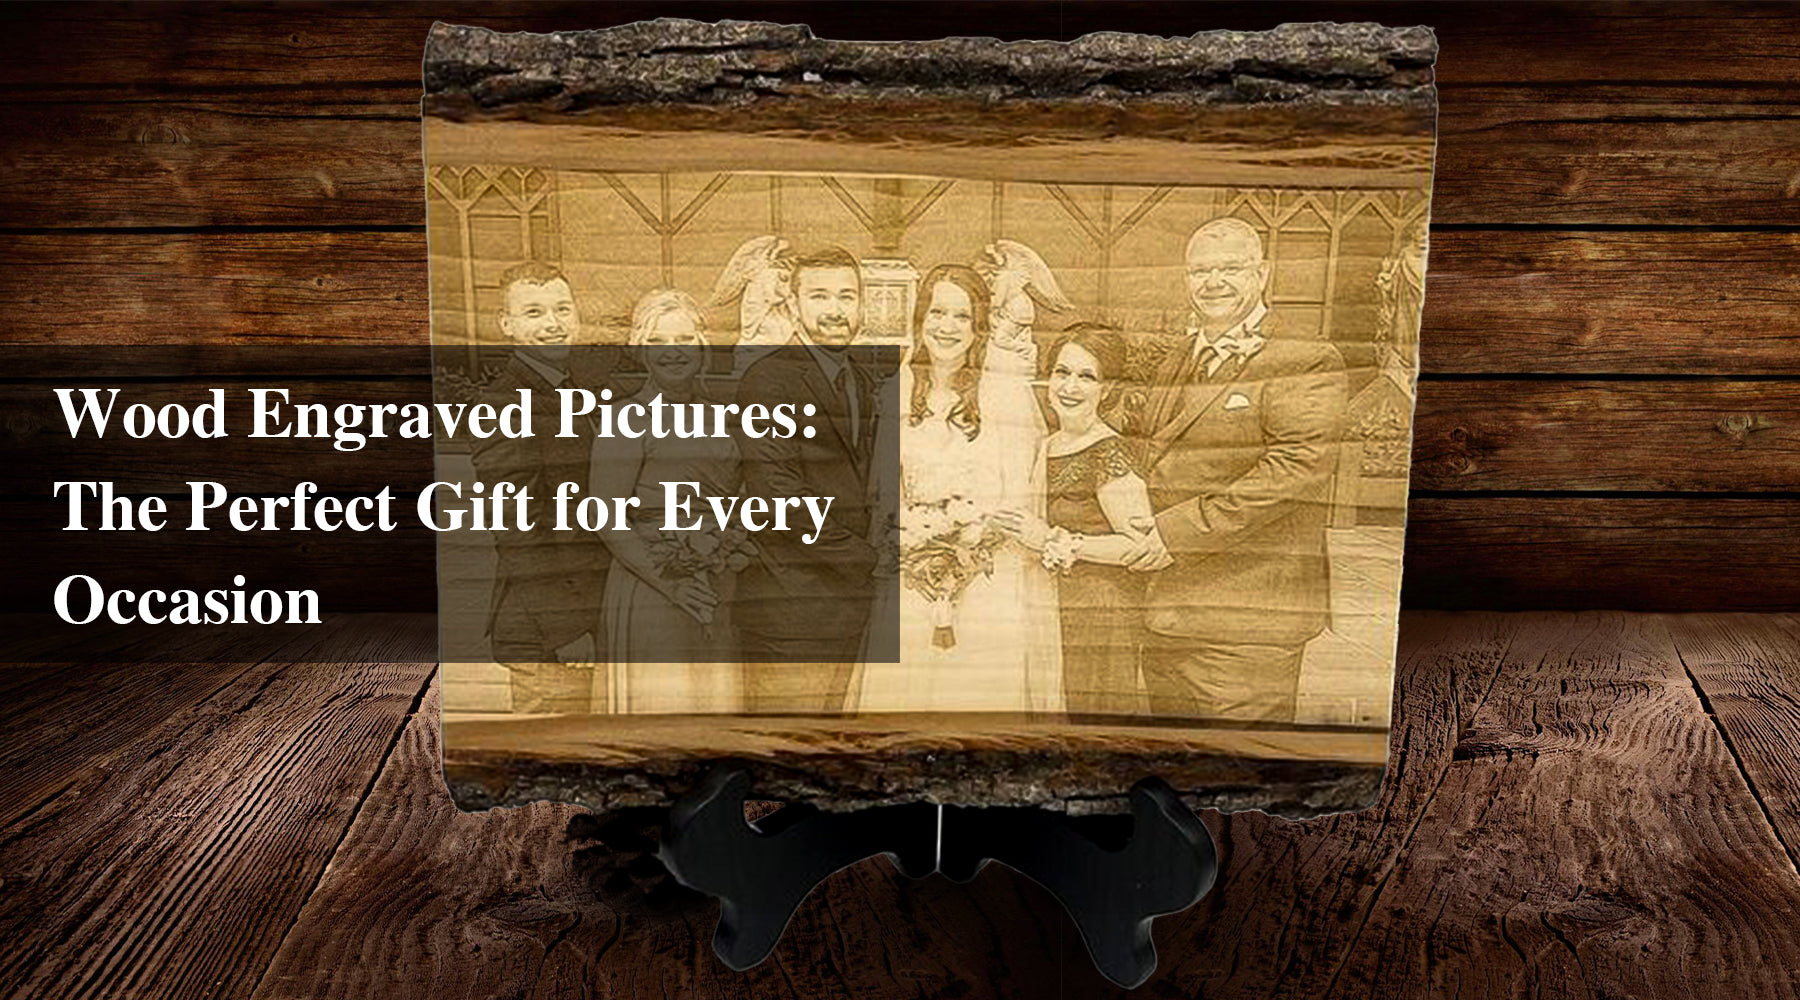 Wood Engraved Pictures: The Perfect Gift for Every Occasion